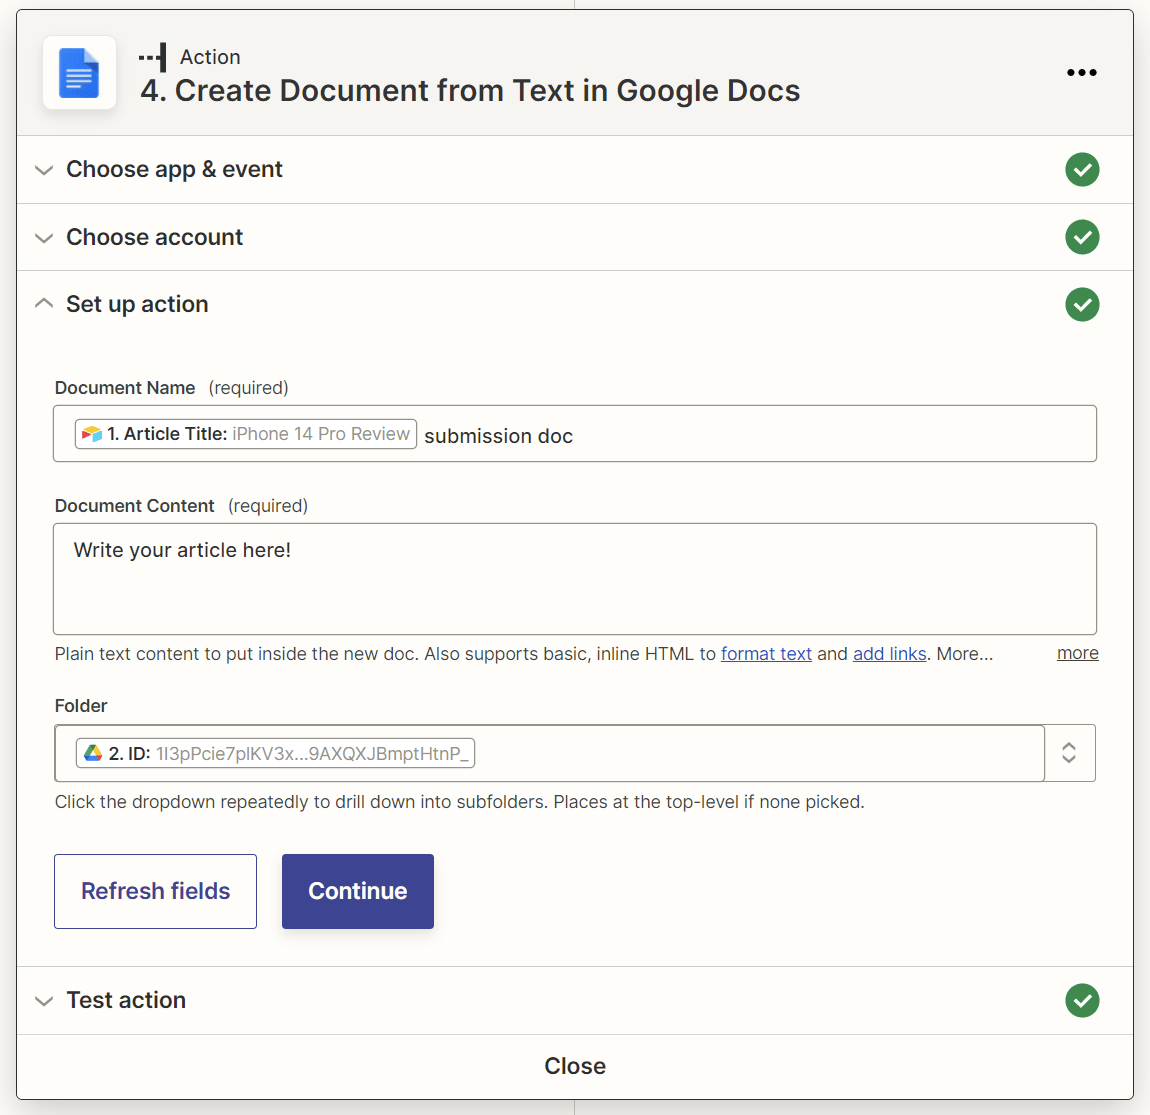 Action step: Create Document from Text in Google Docs